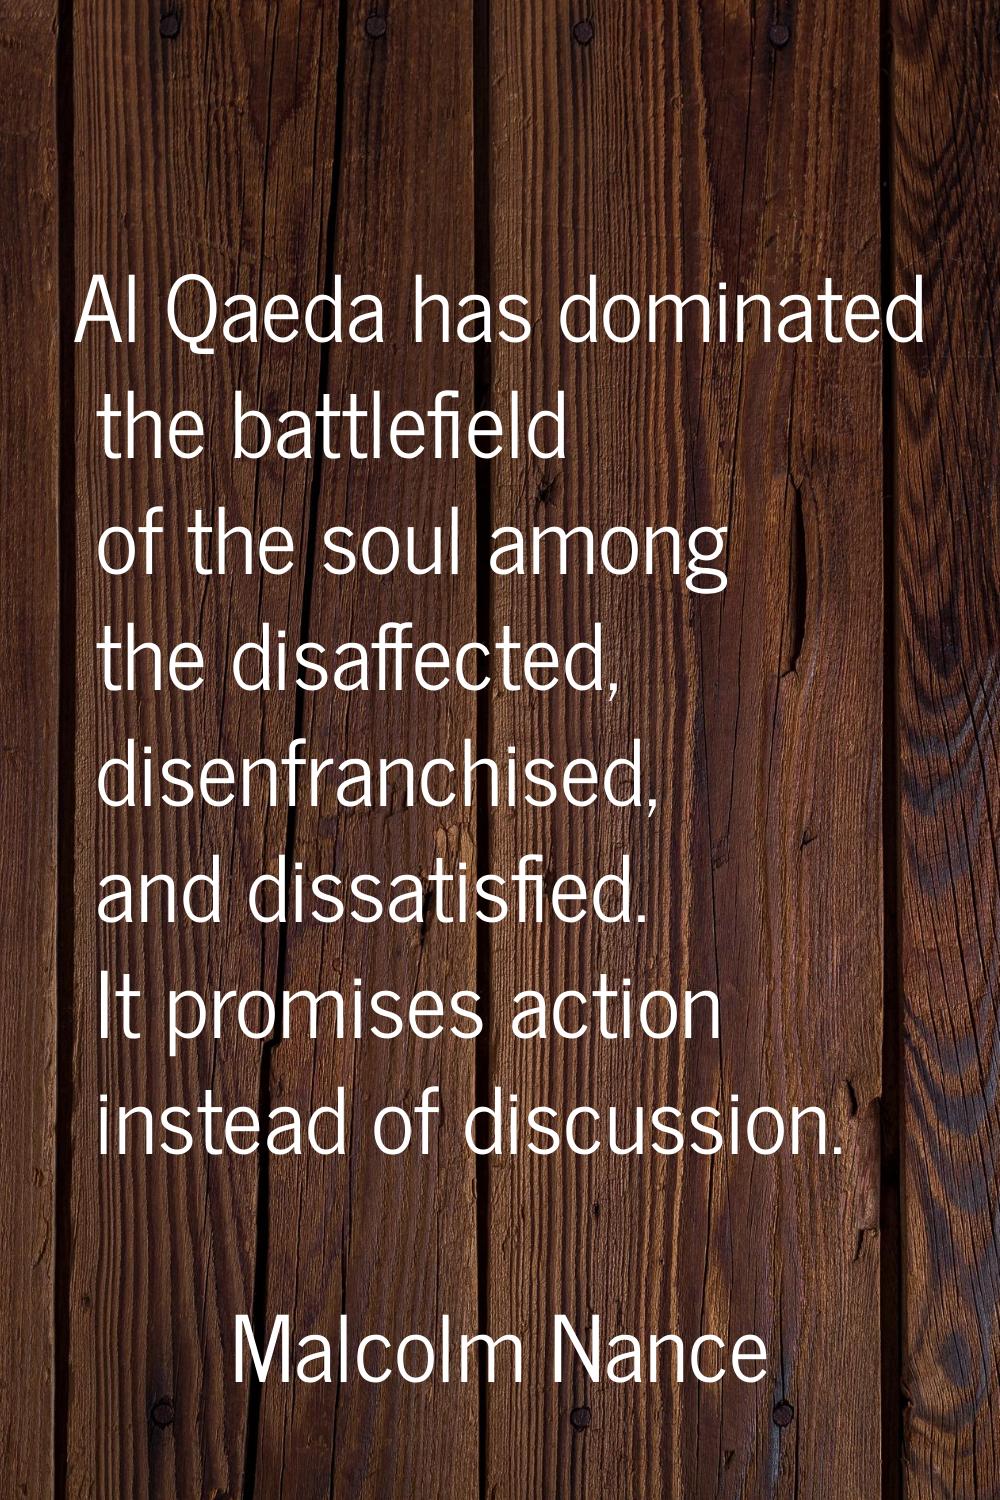 Al Qaeda has dominated the battlefield of the soul among the disaffected, disenfranchised, and diss